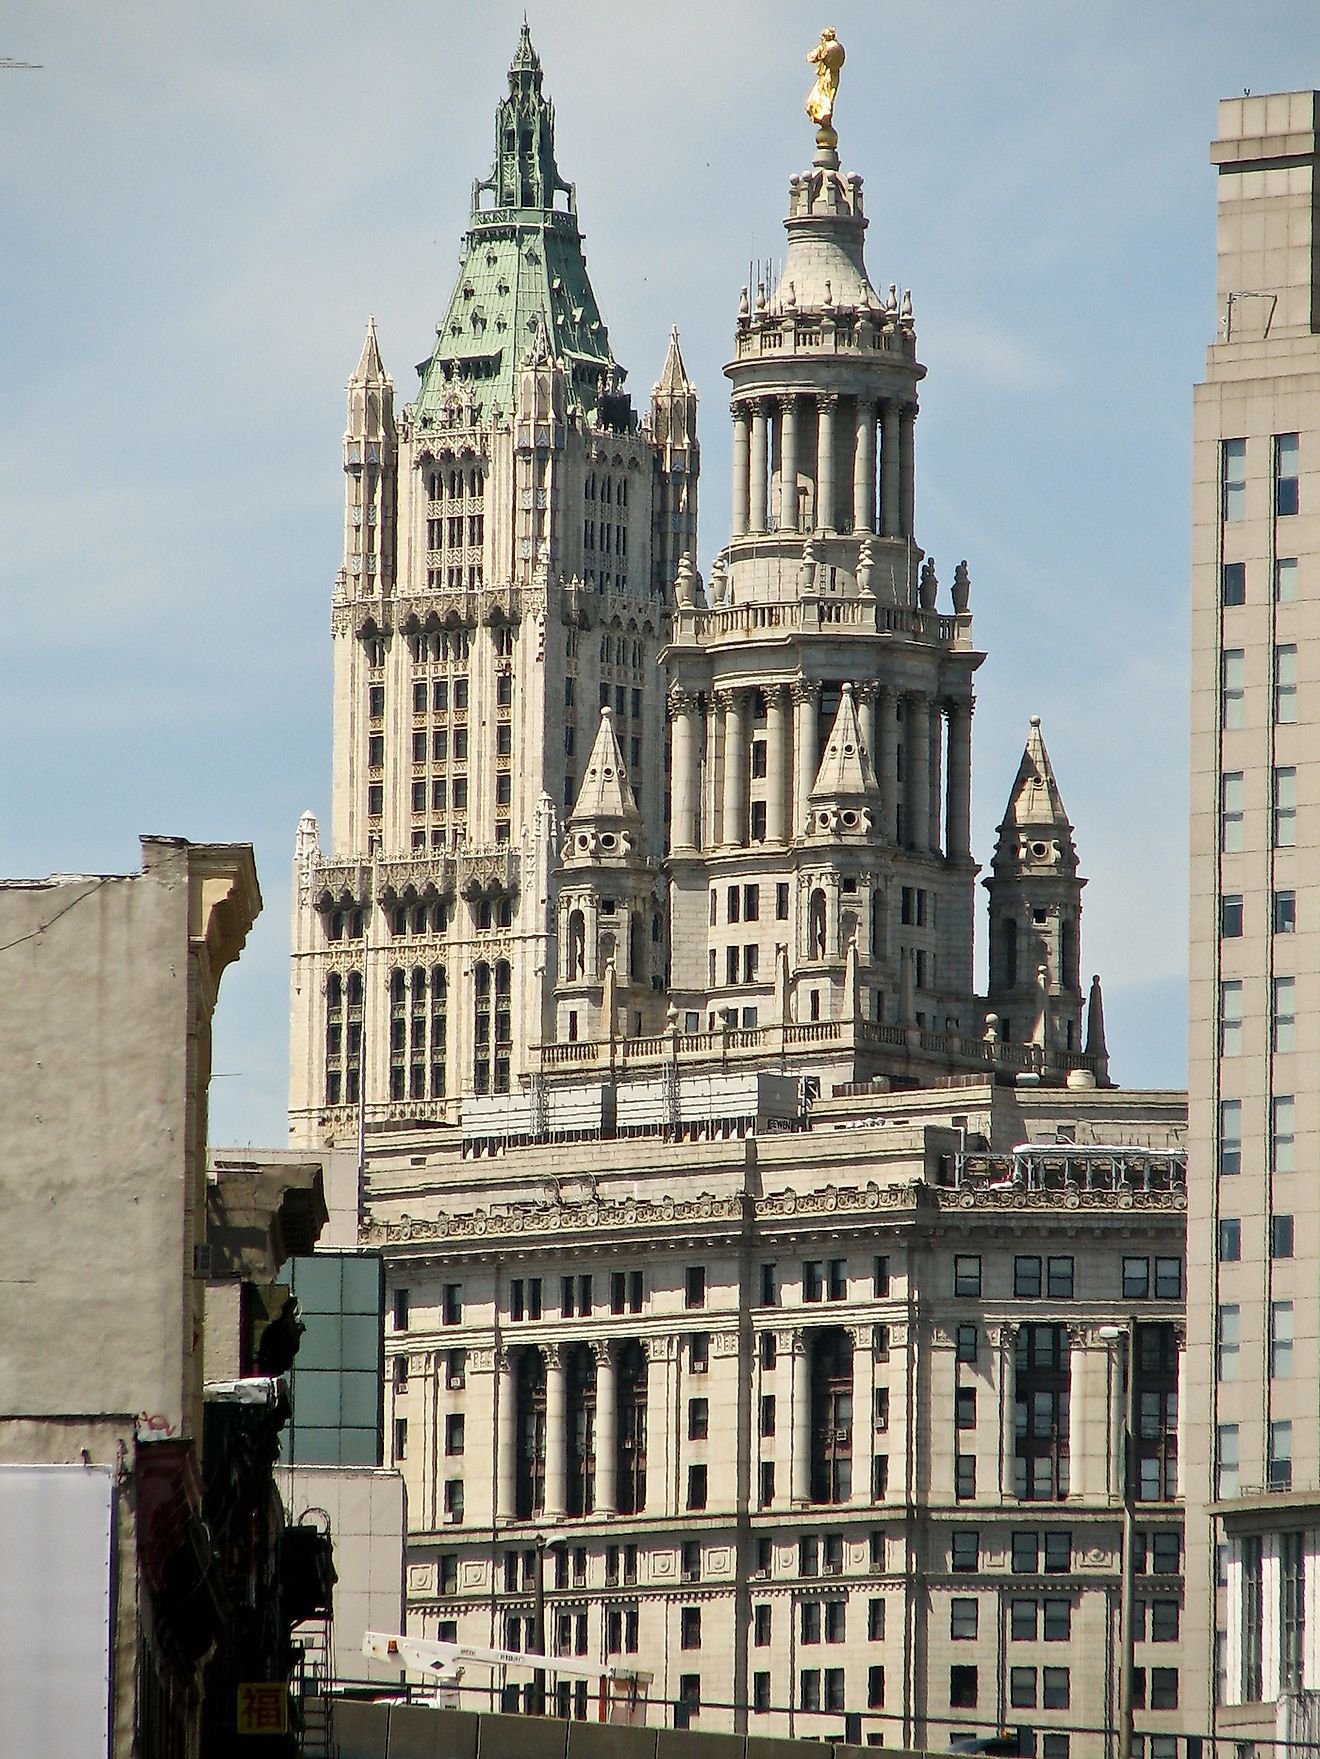 New York City - Public Advocates and Woolworth Building. Image credit: Norbert Nagel, Mörfelden-Walldorf, Germany/Wikimedia.org